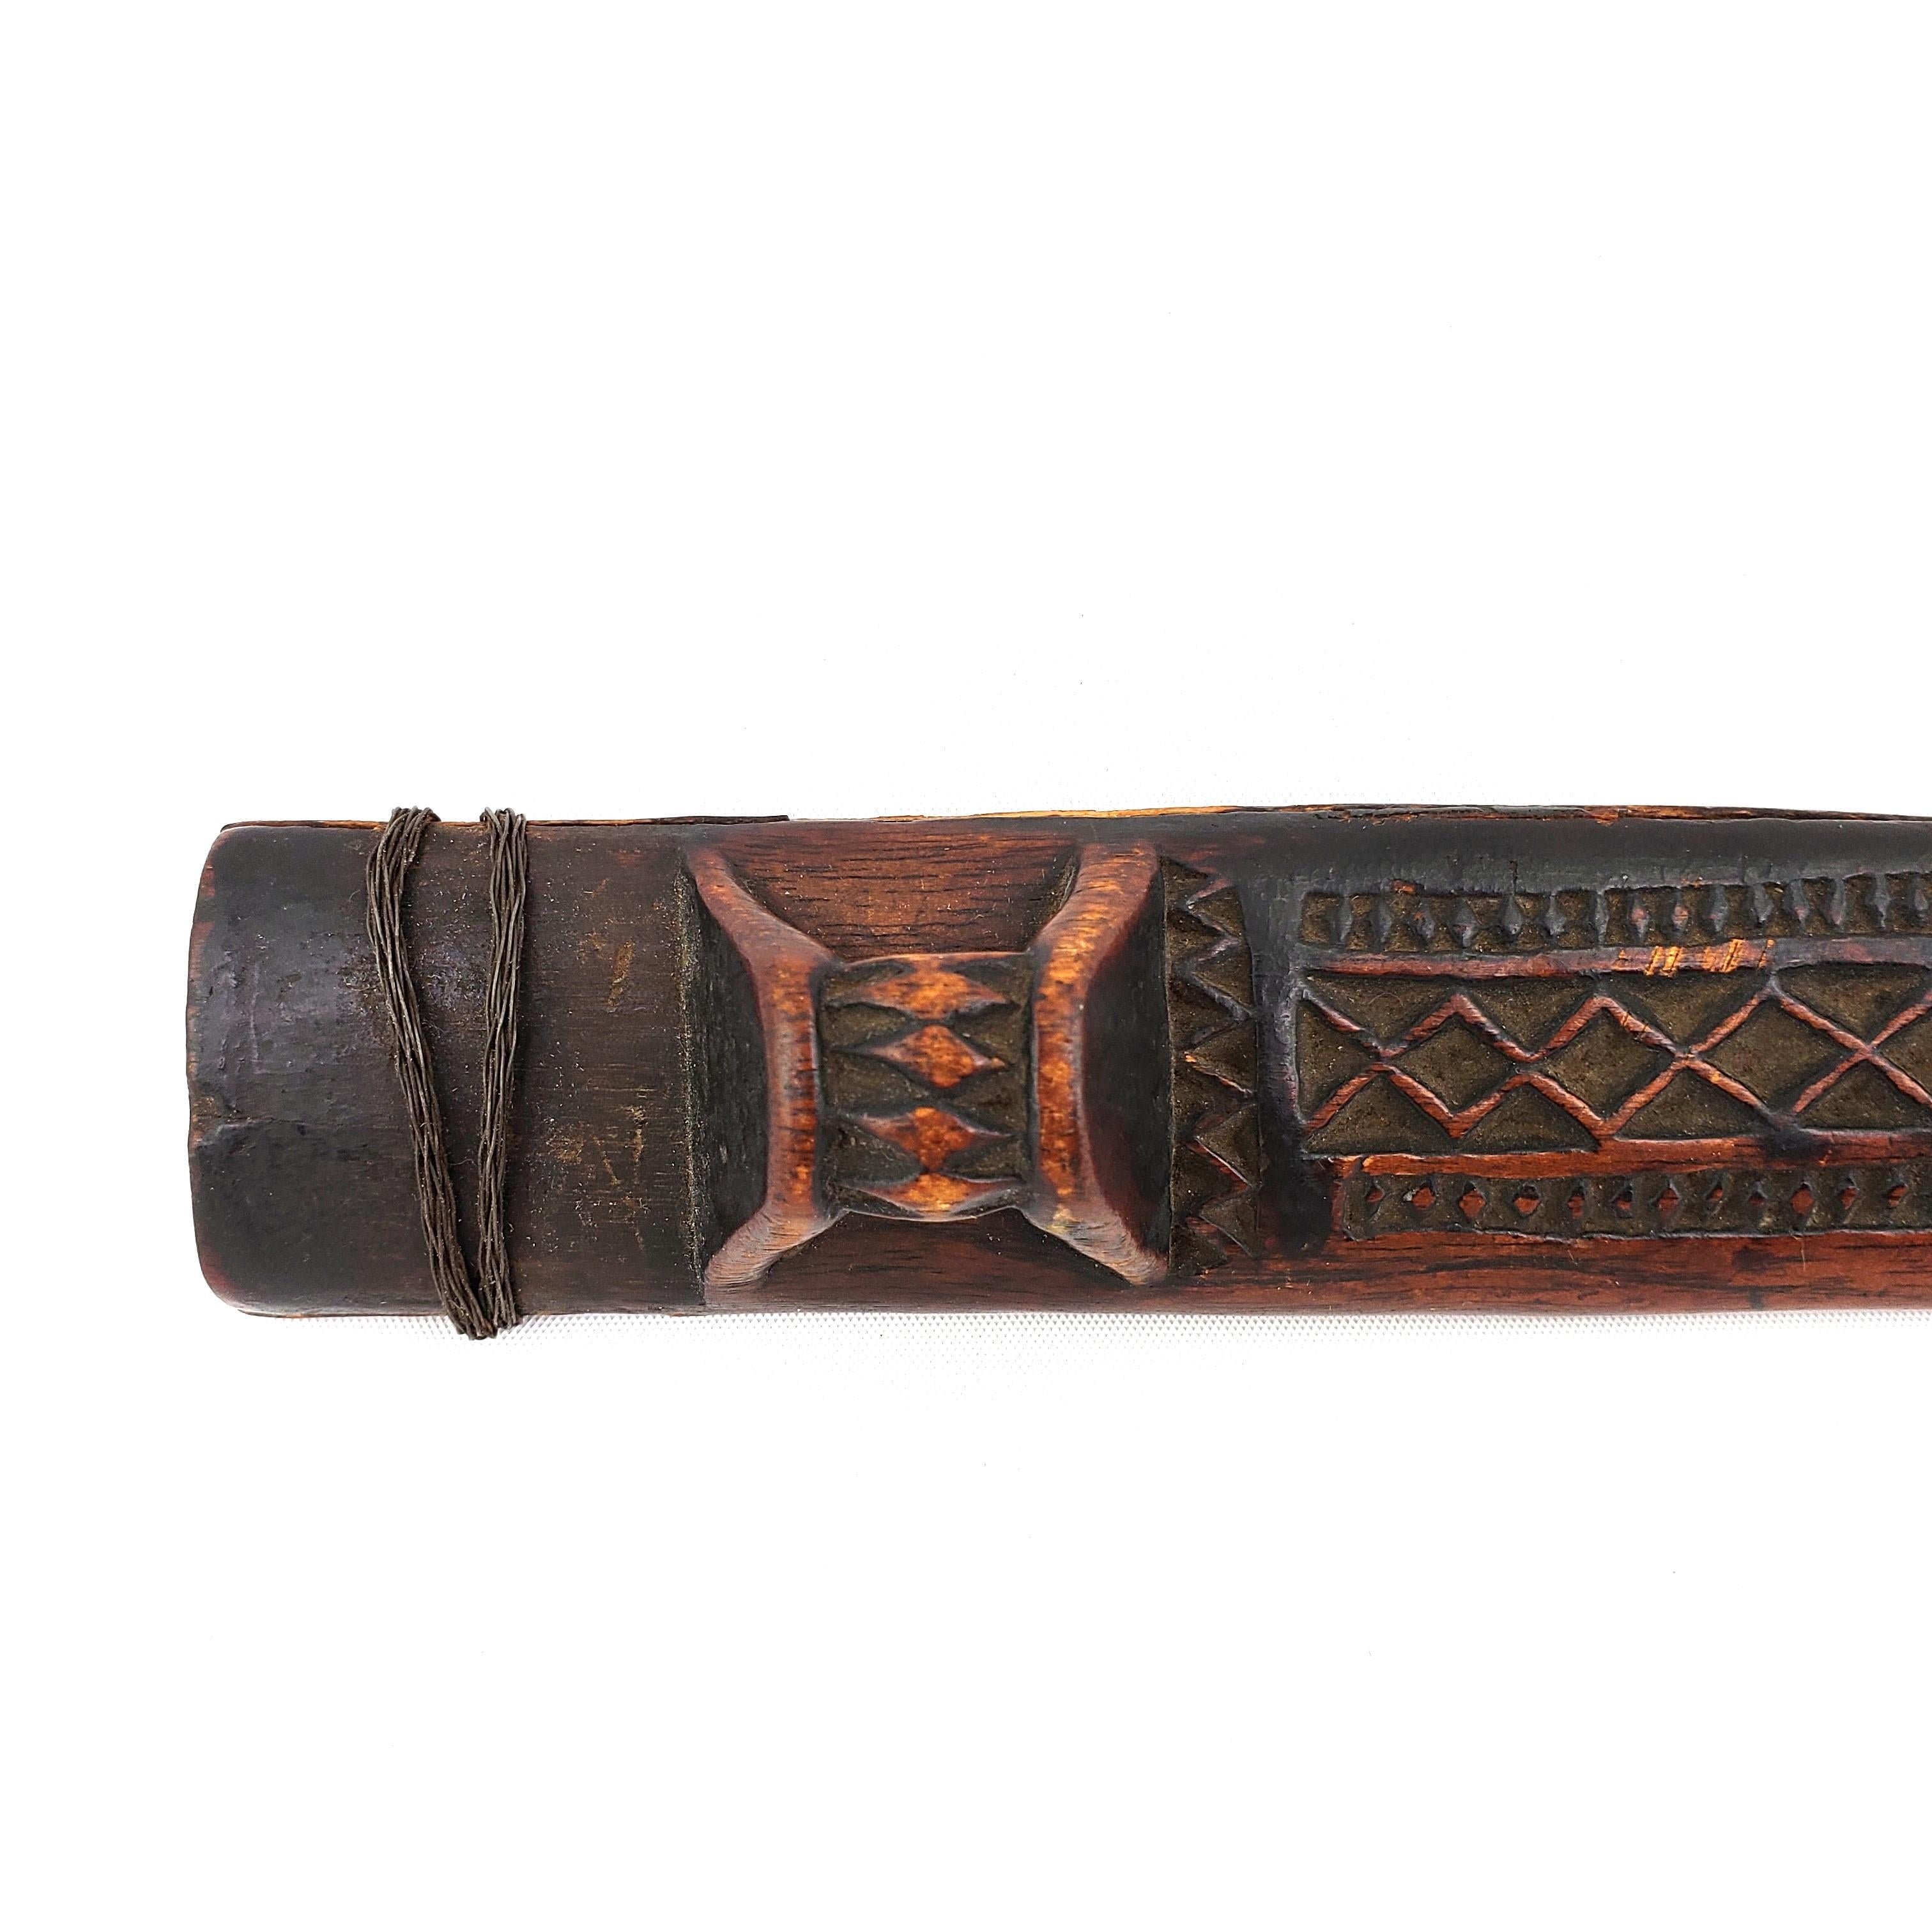 19th Century dagger from the Shona people of Zimbabwe. It features beautiful carvings, a rich aged patina and a handmade steeped blade.